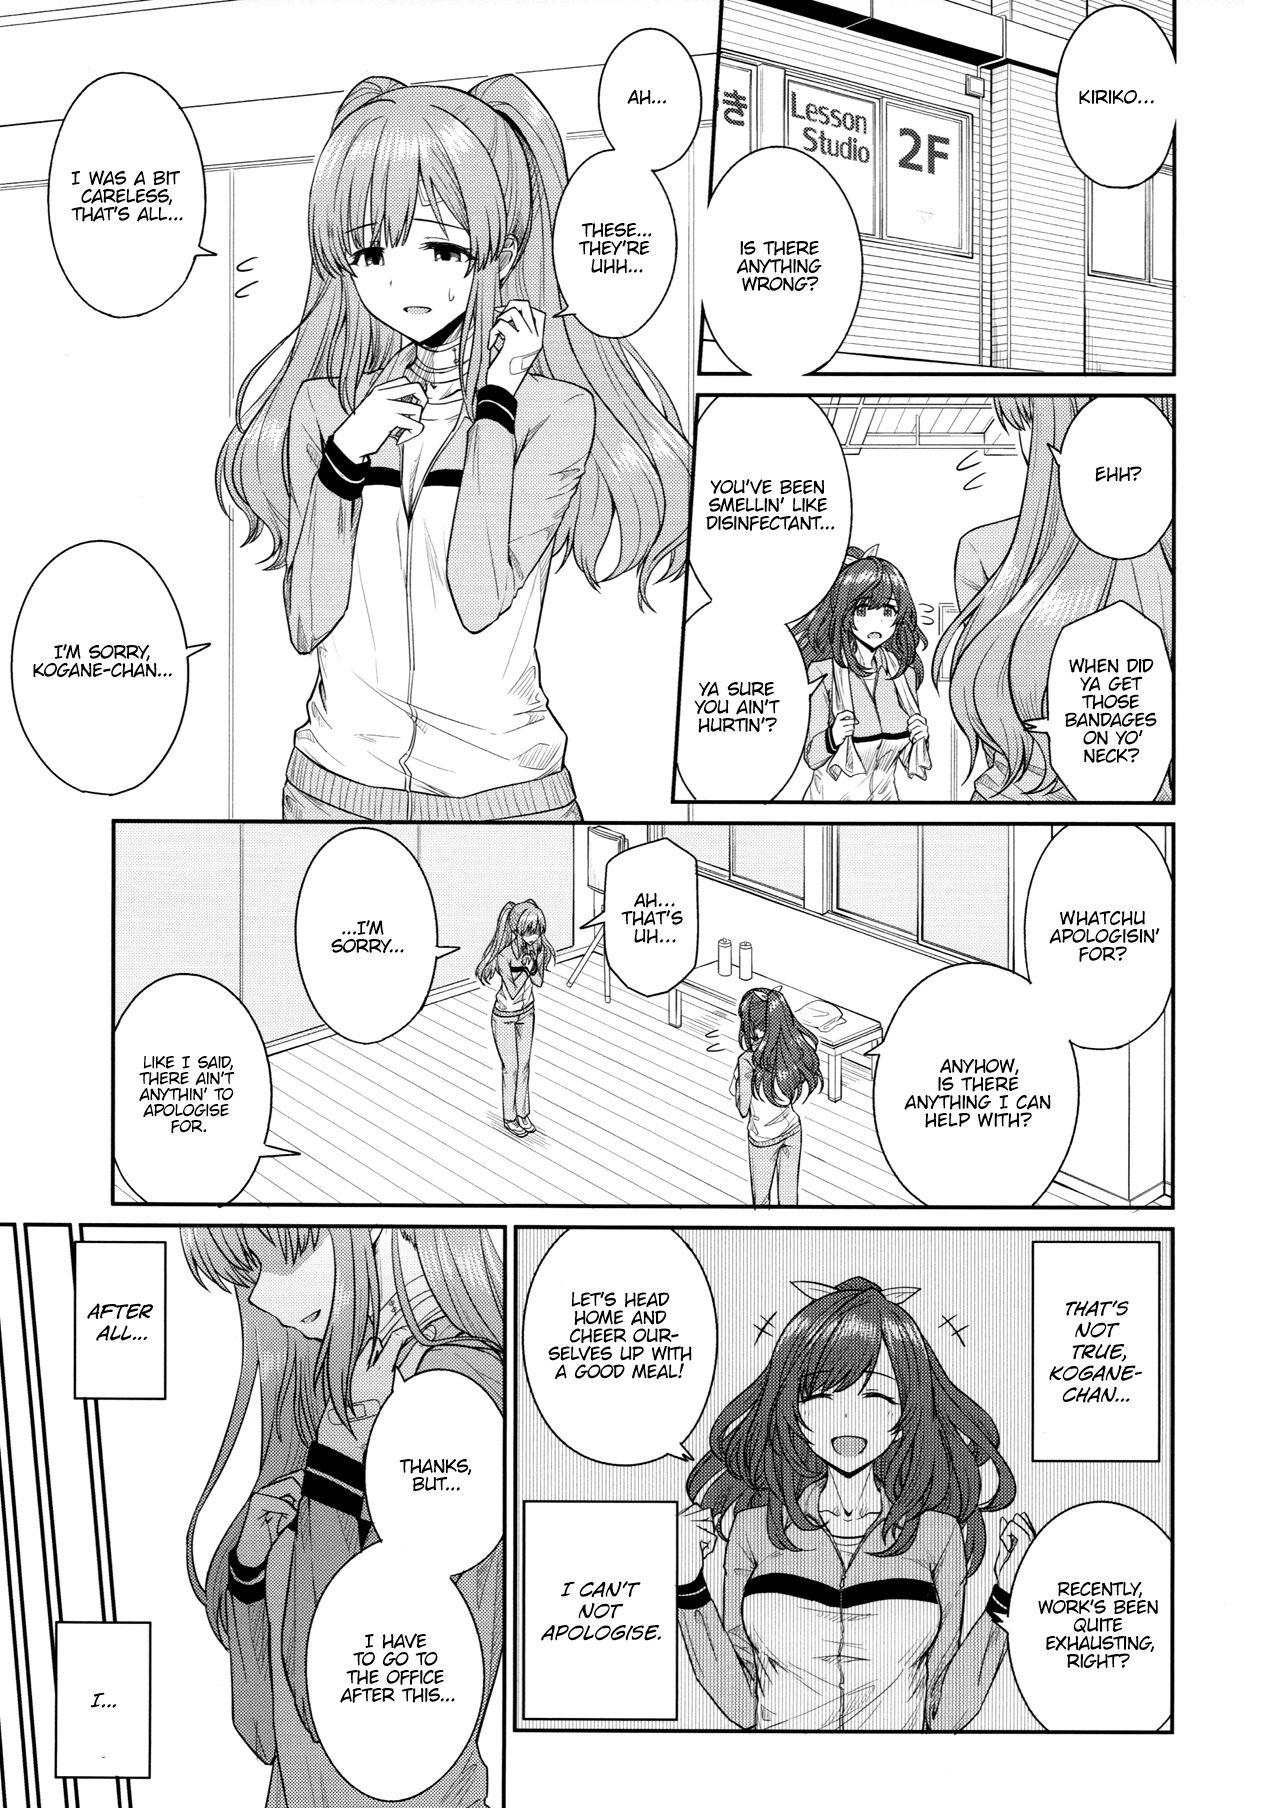 Lingerie Mou Hakui wa Niawanai | The White Gown Doesn't Suit Me Anymore - The idolmaster Czech - Page 2